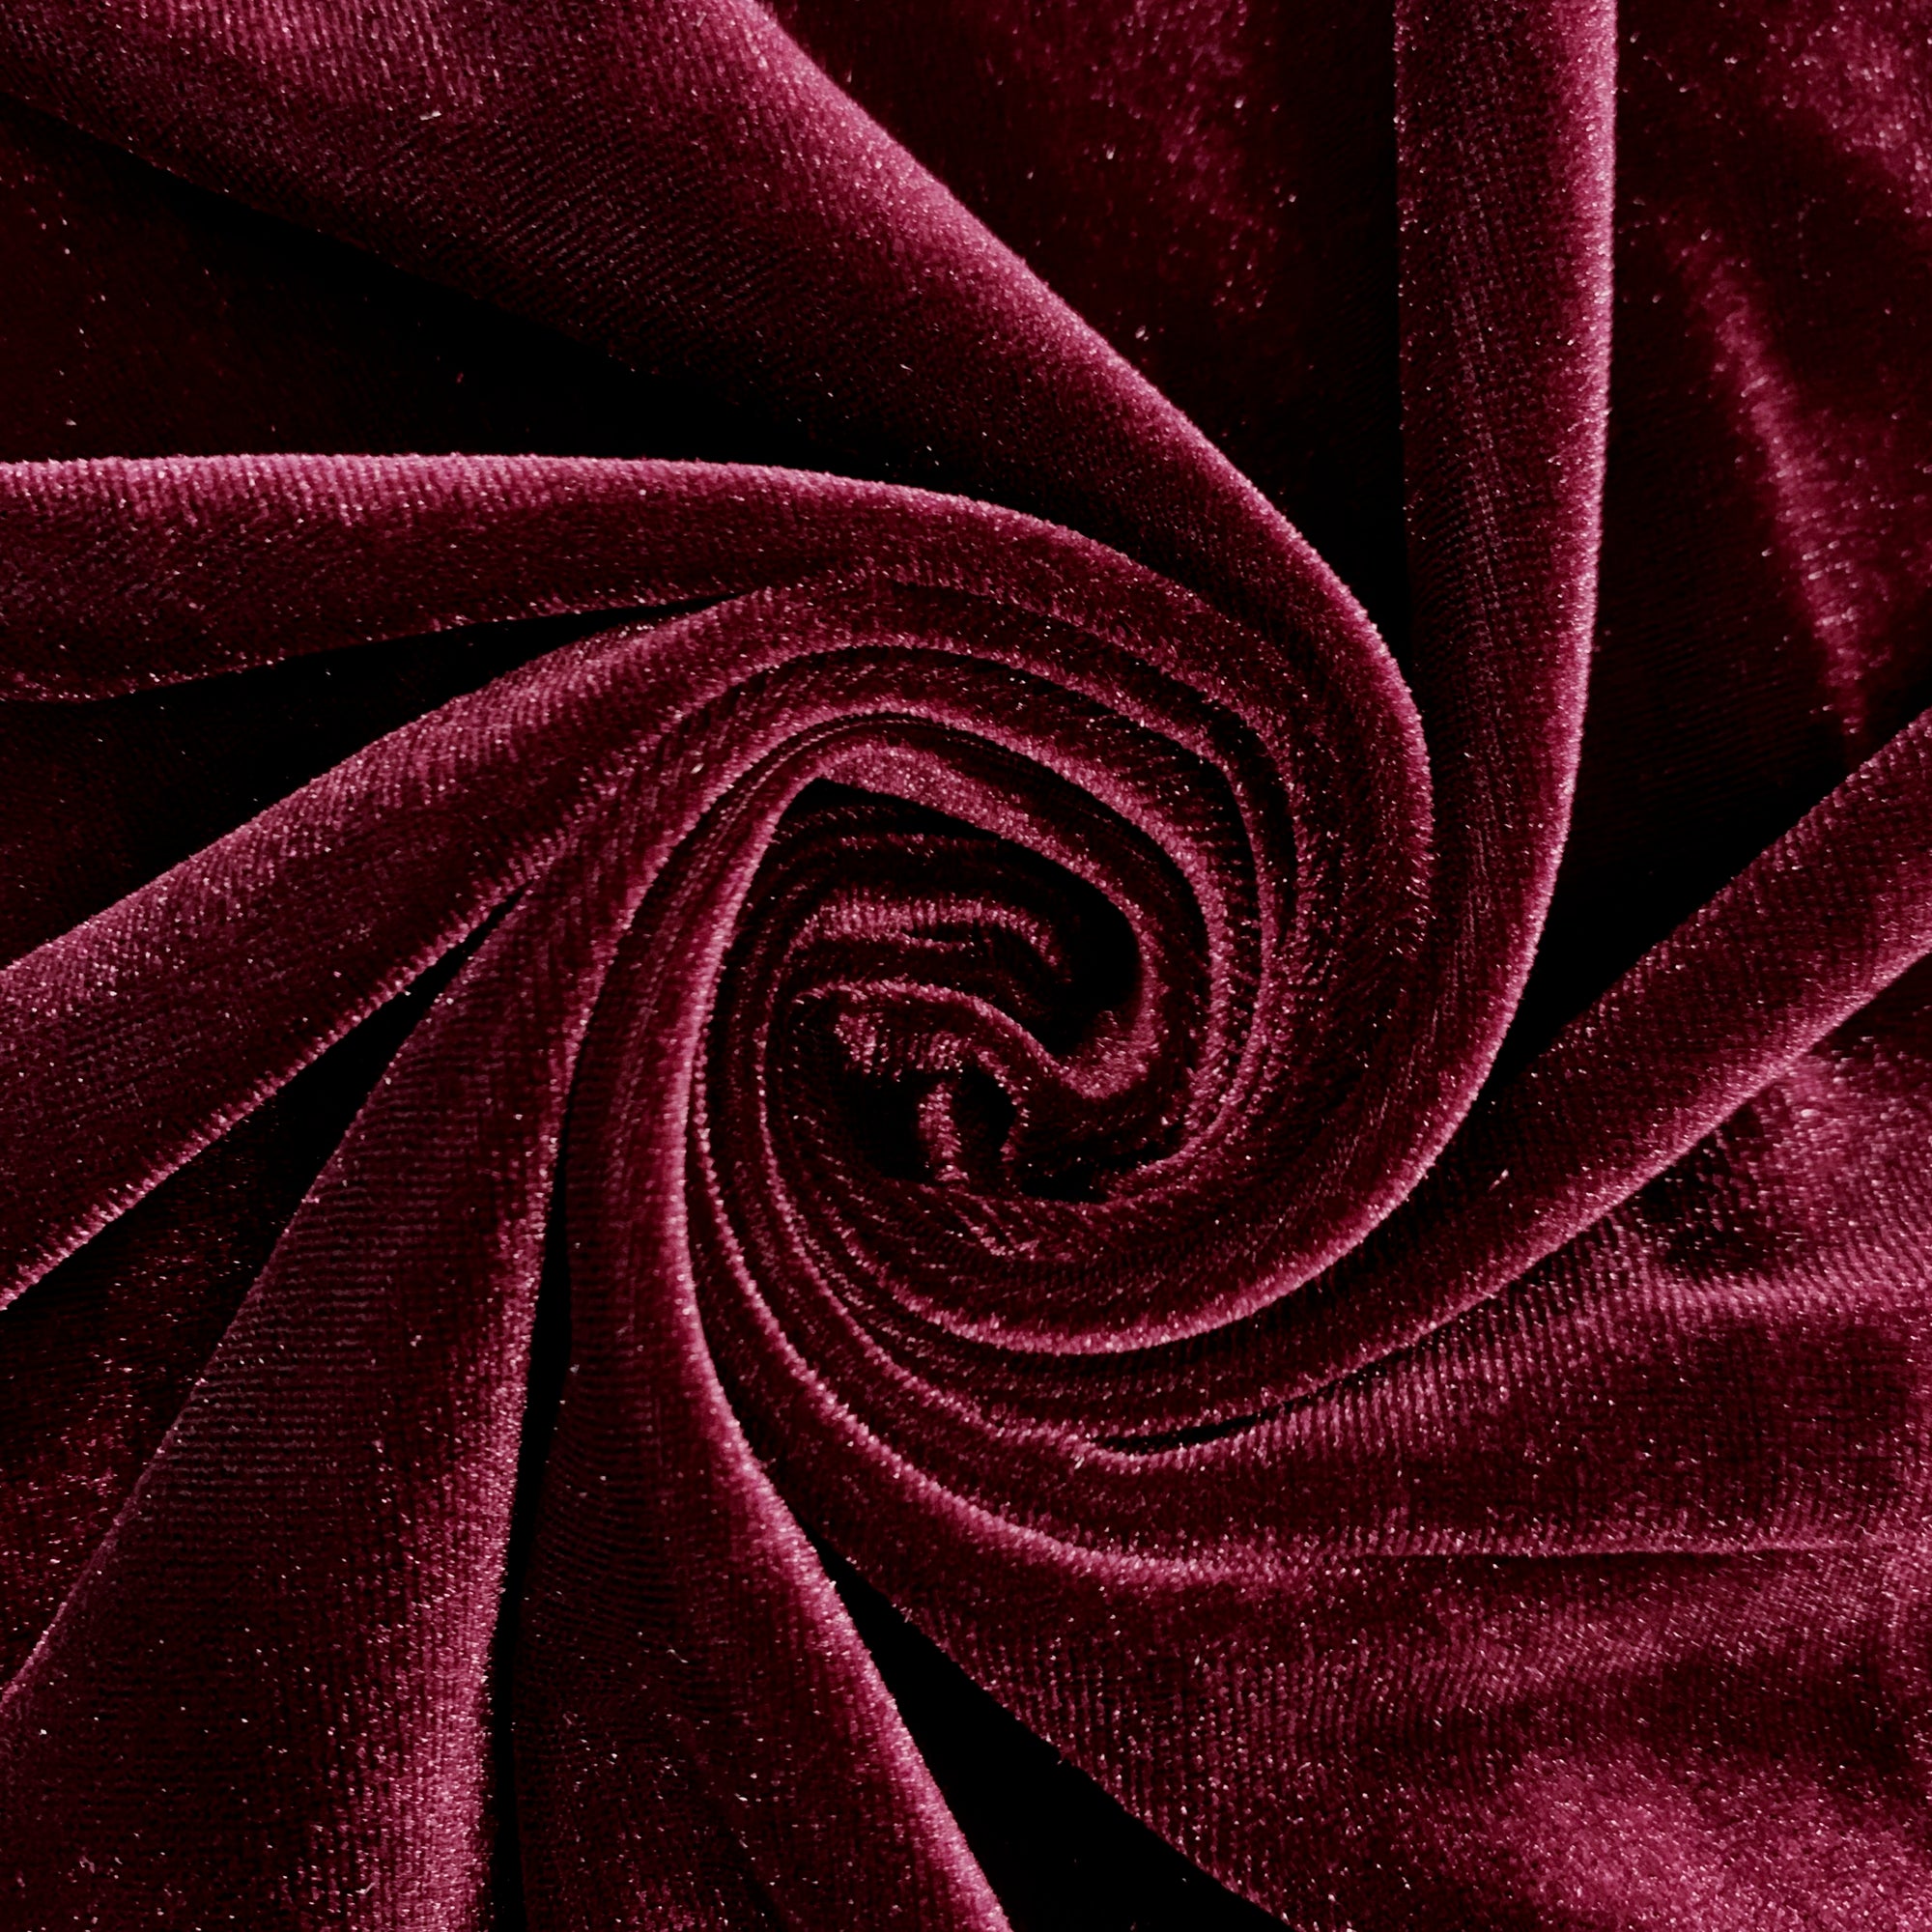 Princess BURGUNDY Polyester Stretch Velvet Fabric for Bows, Top Knots, Head Wraps, Scrunchies, Clothes, Costumes, Crafts